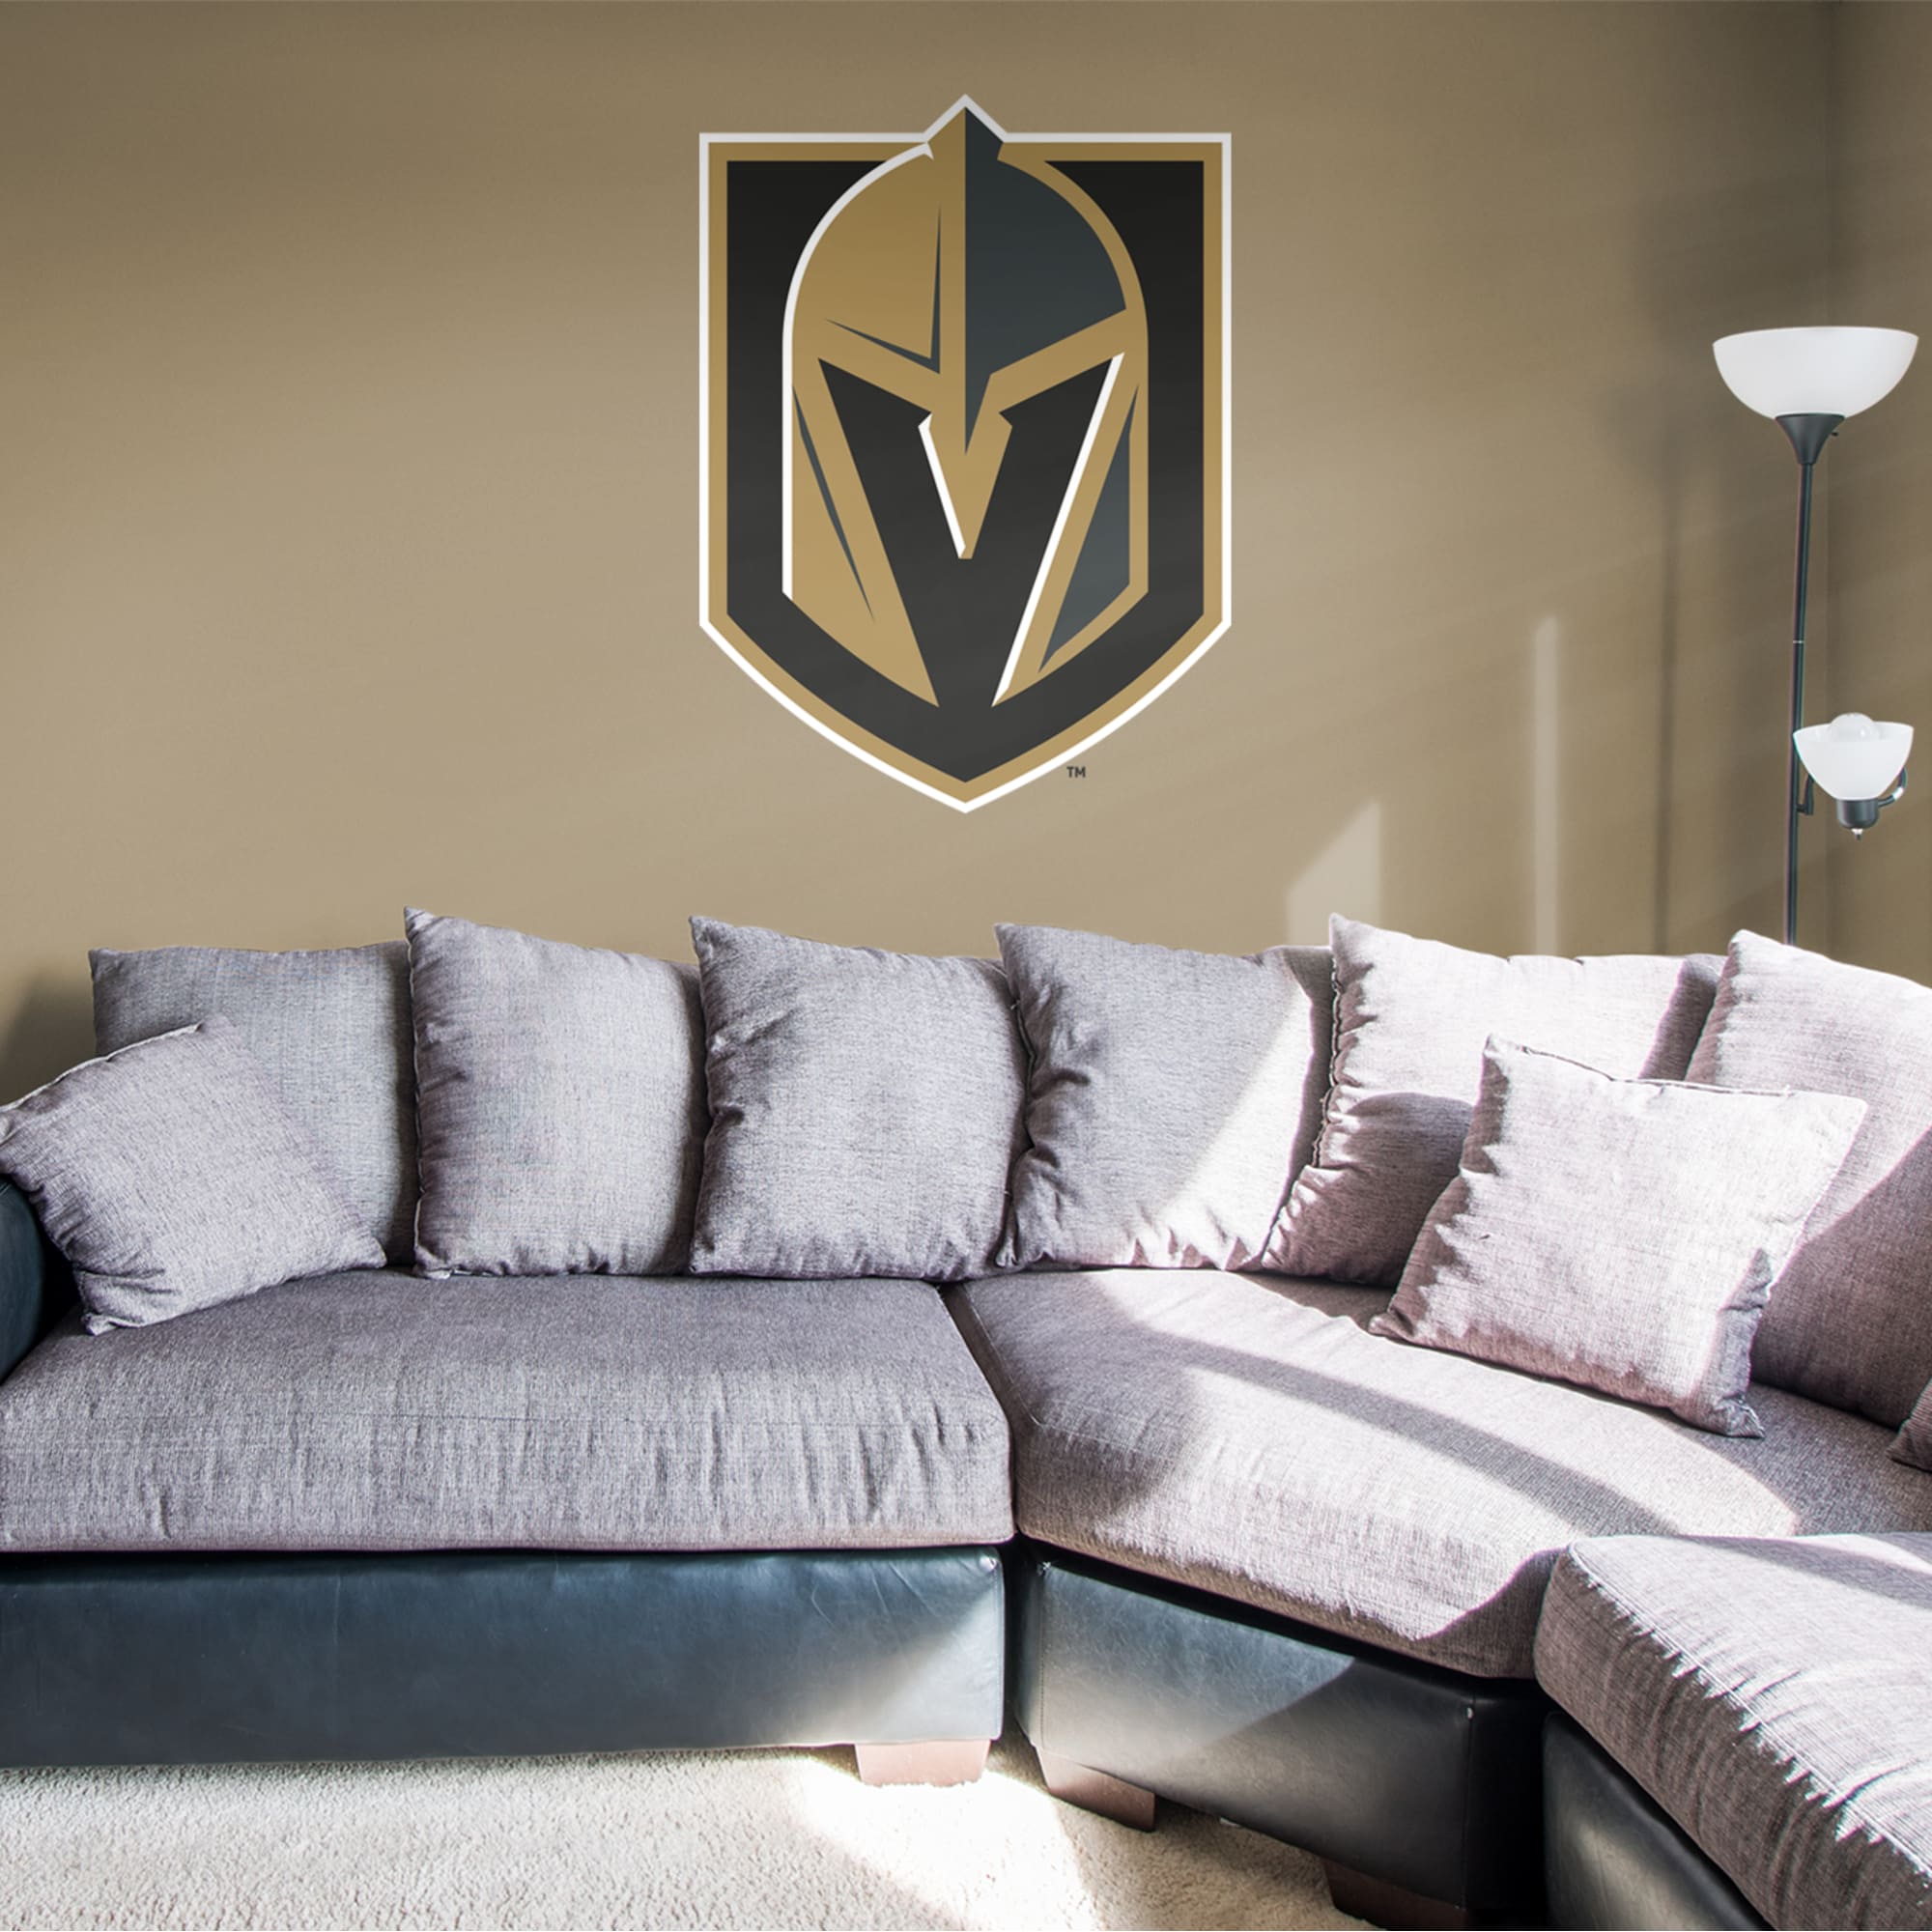 Vegas Golden Knights: Logo - Officially Licensed NHL Removable Wall Decal Giant Logo (38"W x 43"H) by Fathead | Vinyl